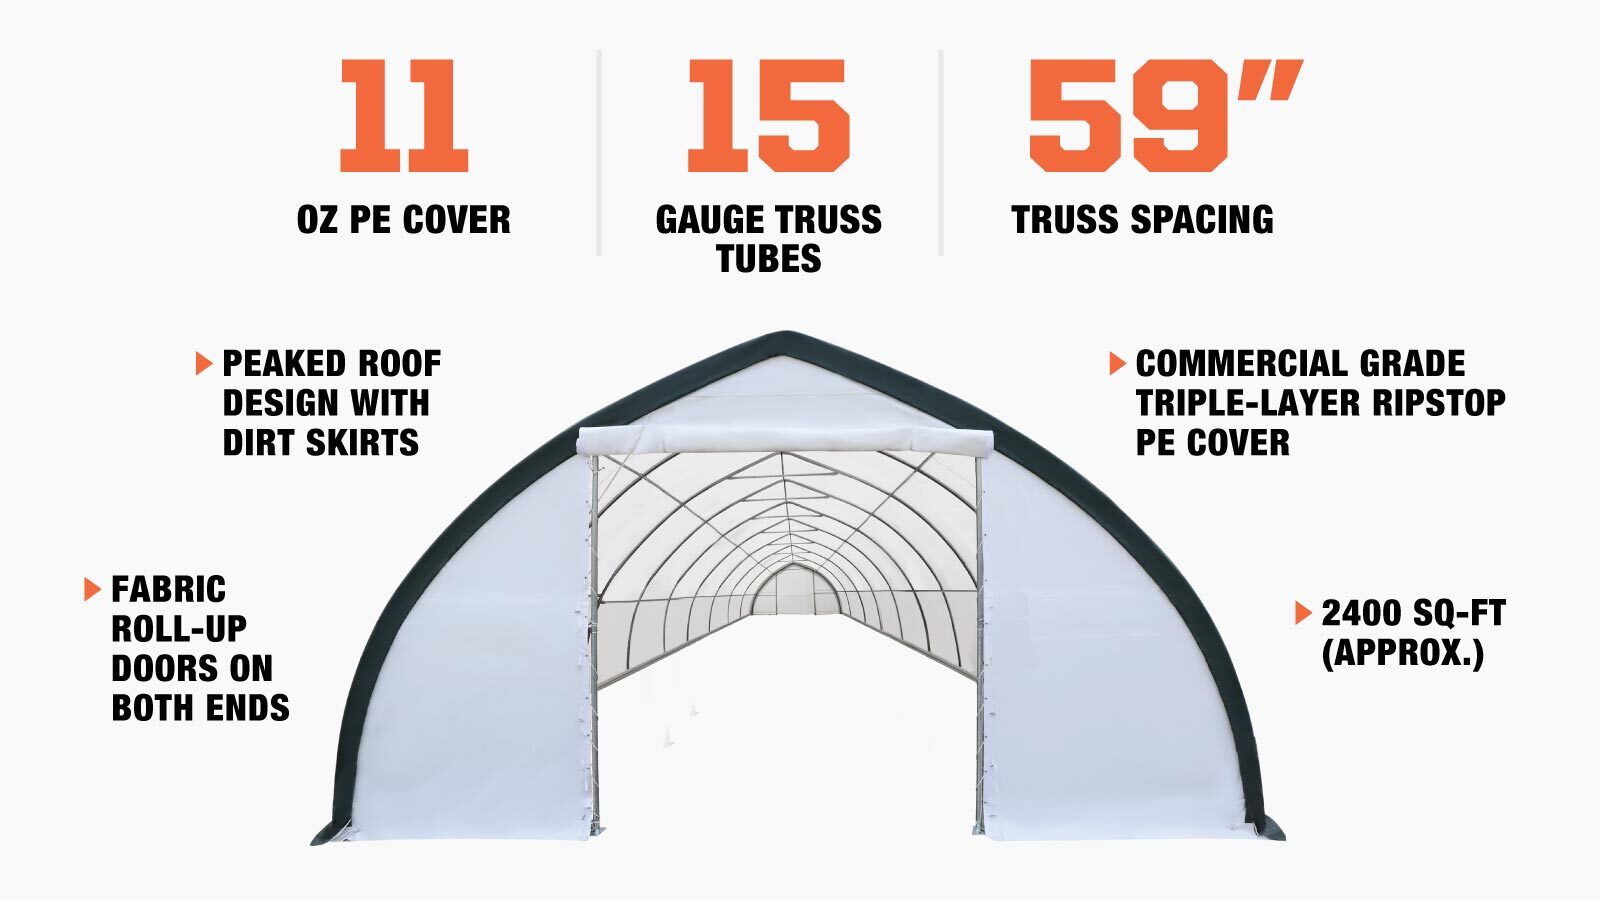 TMG Industrial 30' x 80' Peak Ceiling Storage Shelter with Heavy Duty 11 oz PE Cover & Drive Through Doors, TMG-ST3080E (Previously ST3080)-description-image